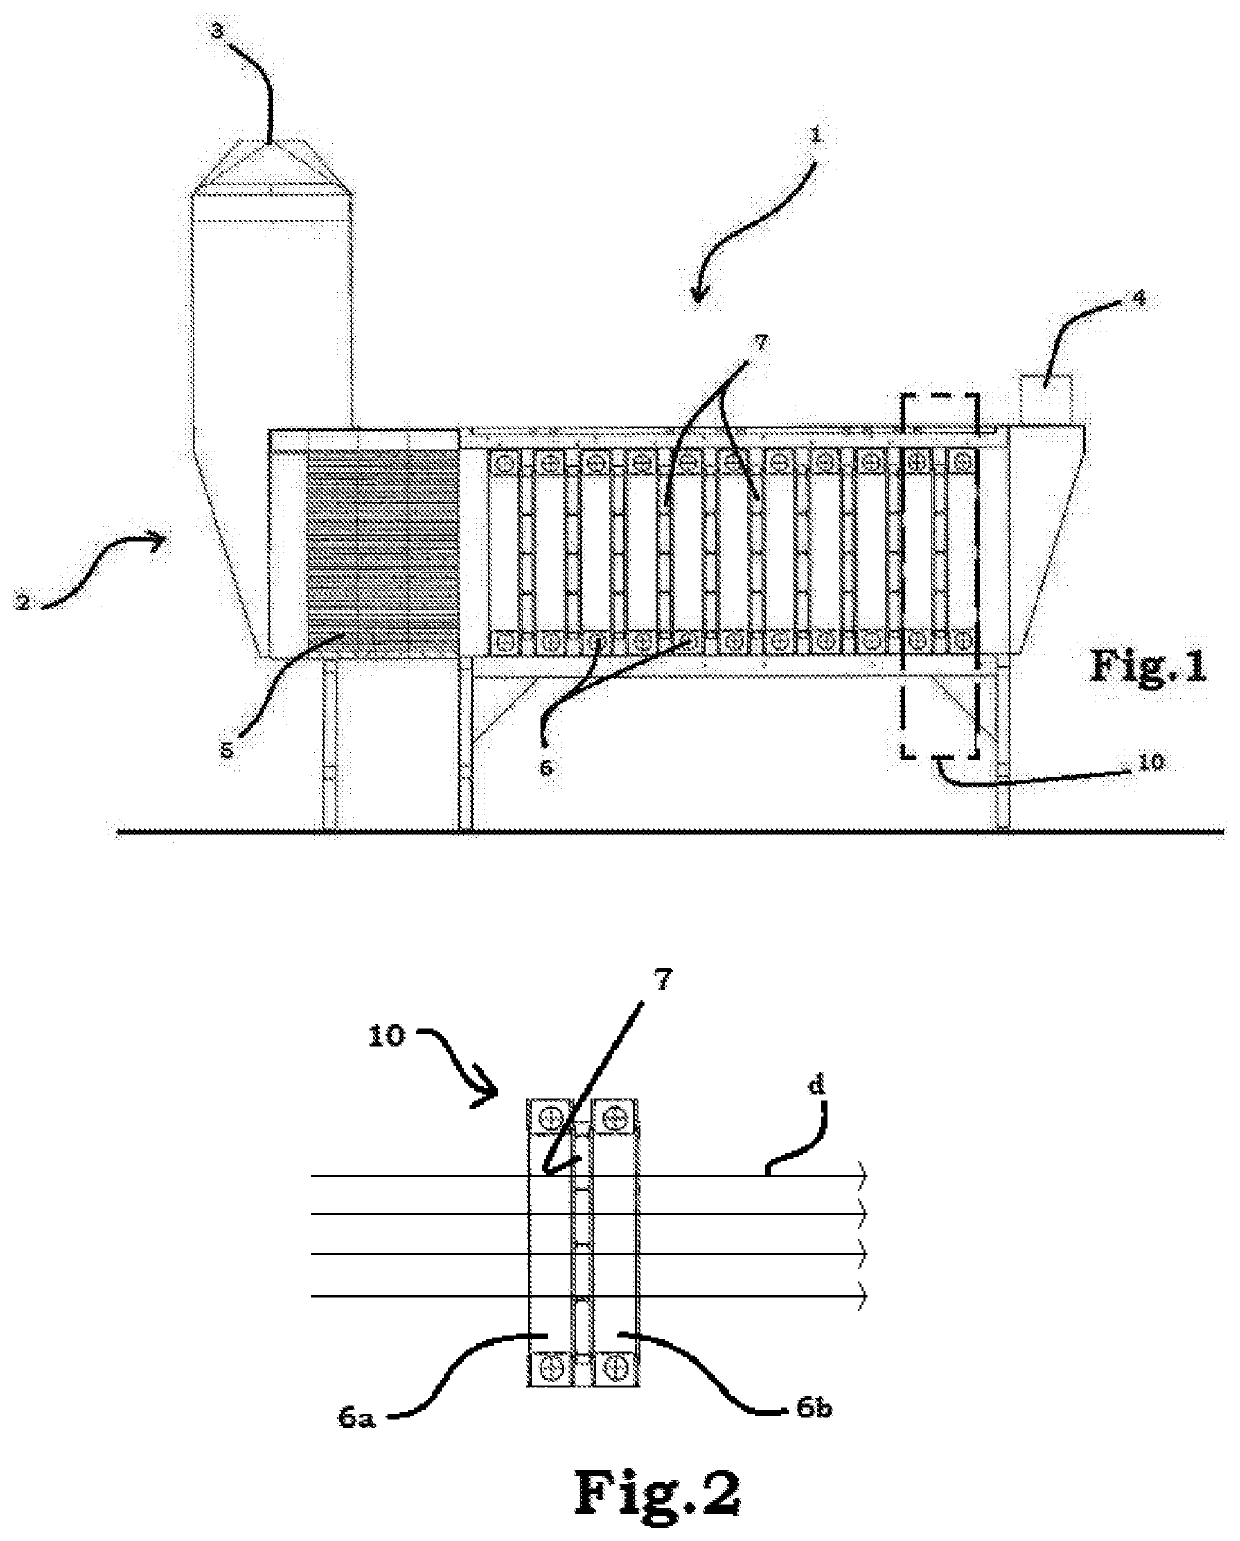 Device for reducing pollutants in a gaseous mixture